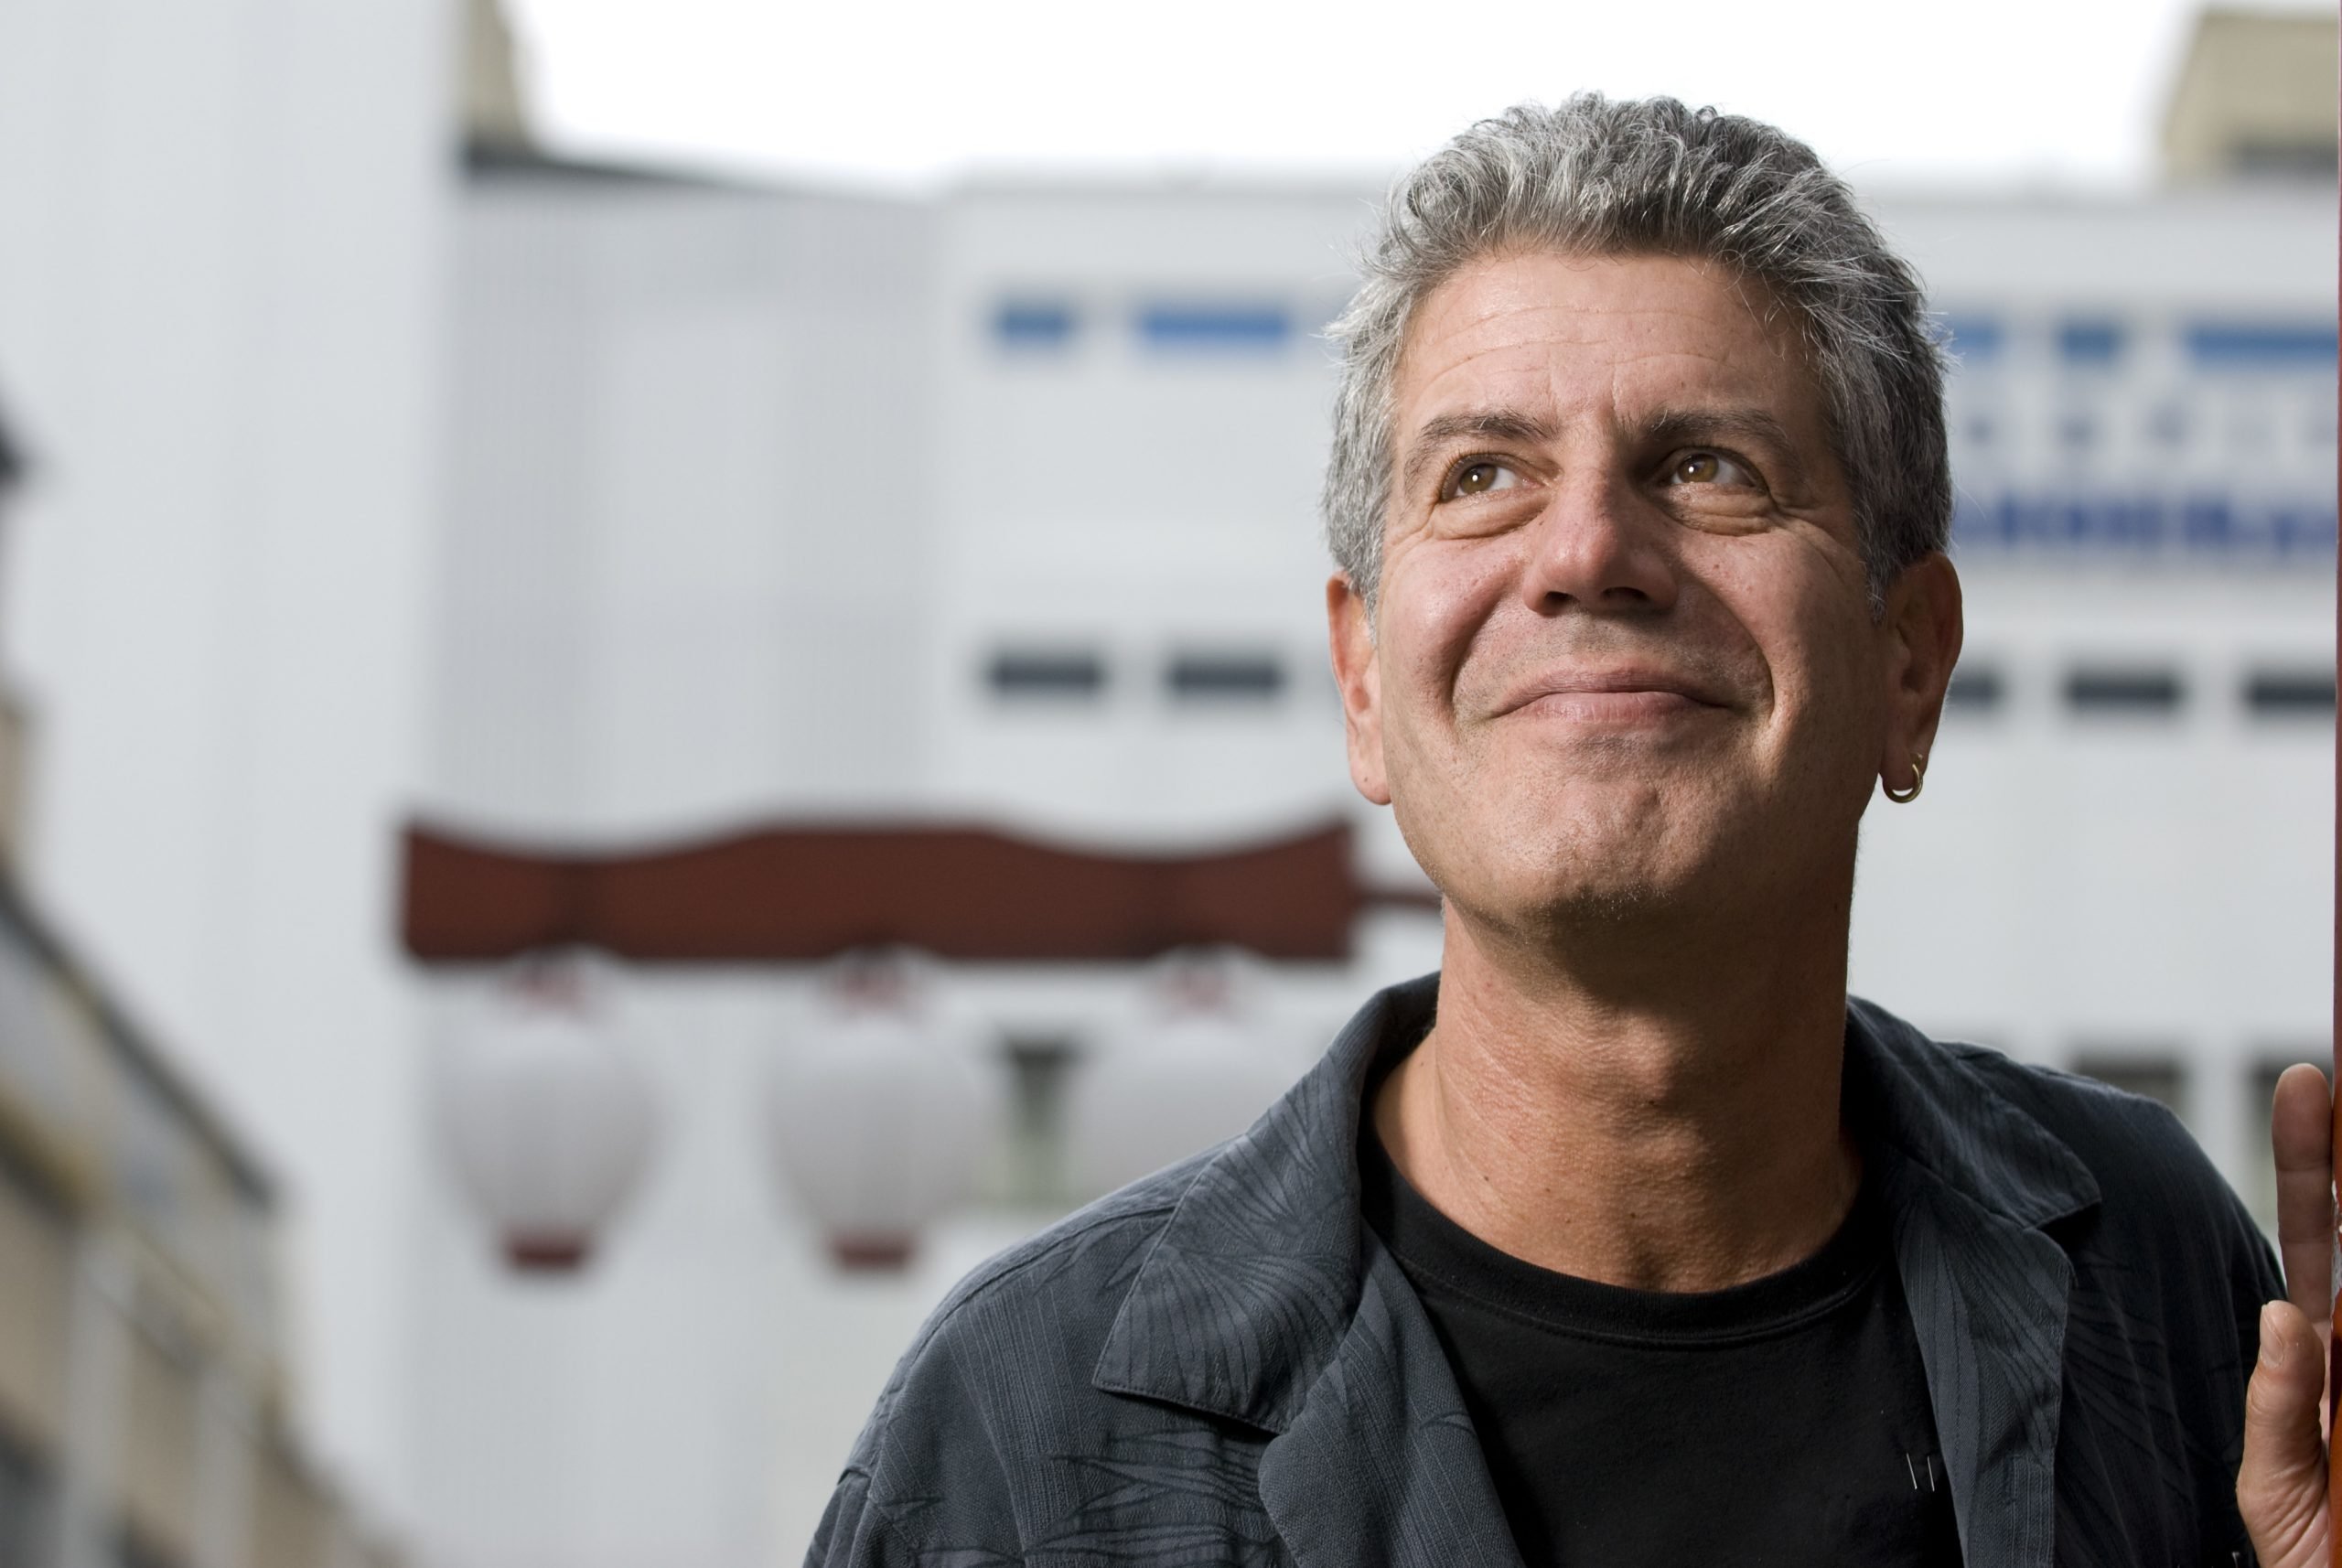 Anthony Bourdain in the Liberdade area of Sao Paulo, Brazil. Bourdain hosts the TV Show "No Reservations" for the Travel Channel.